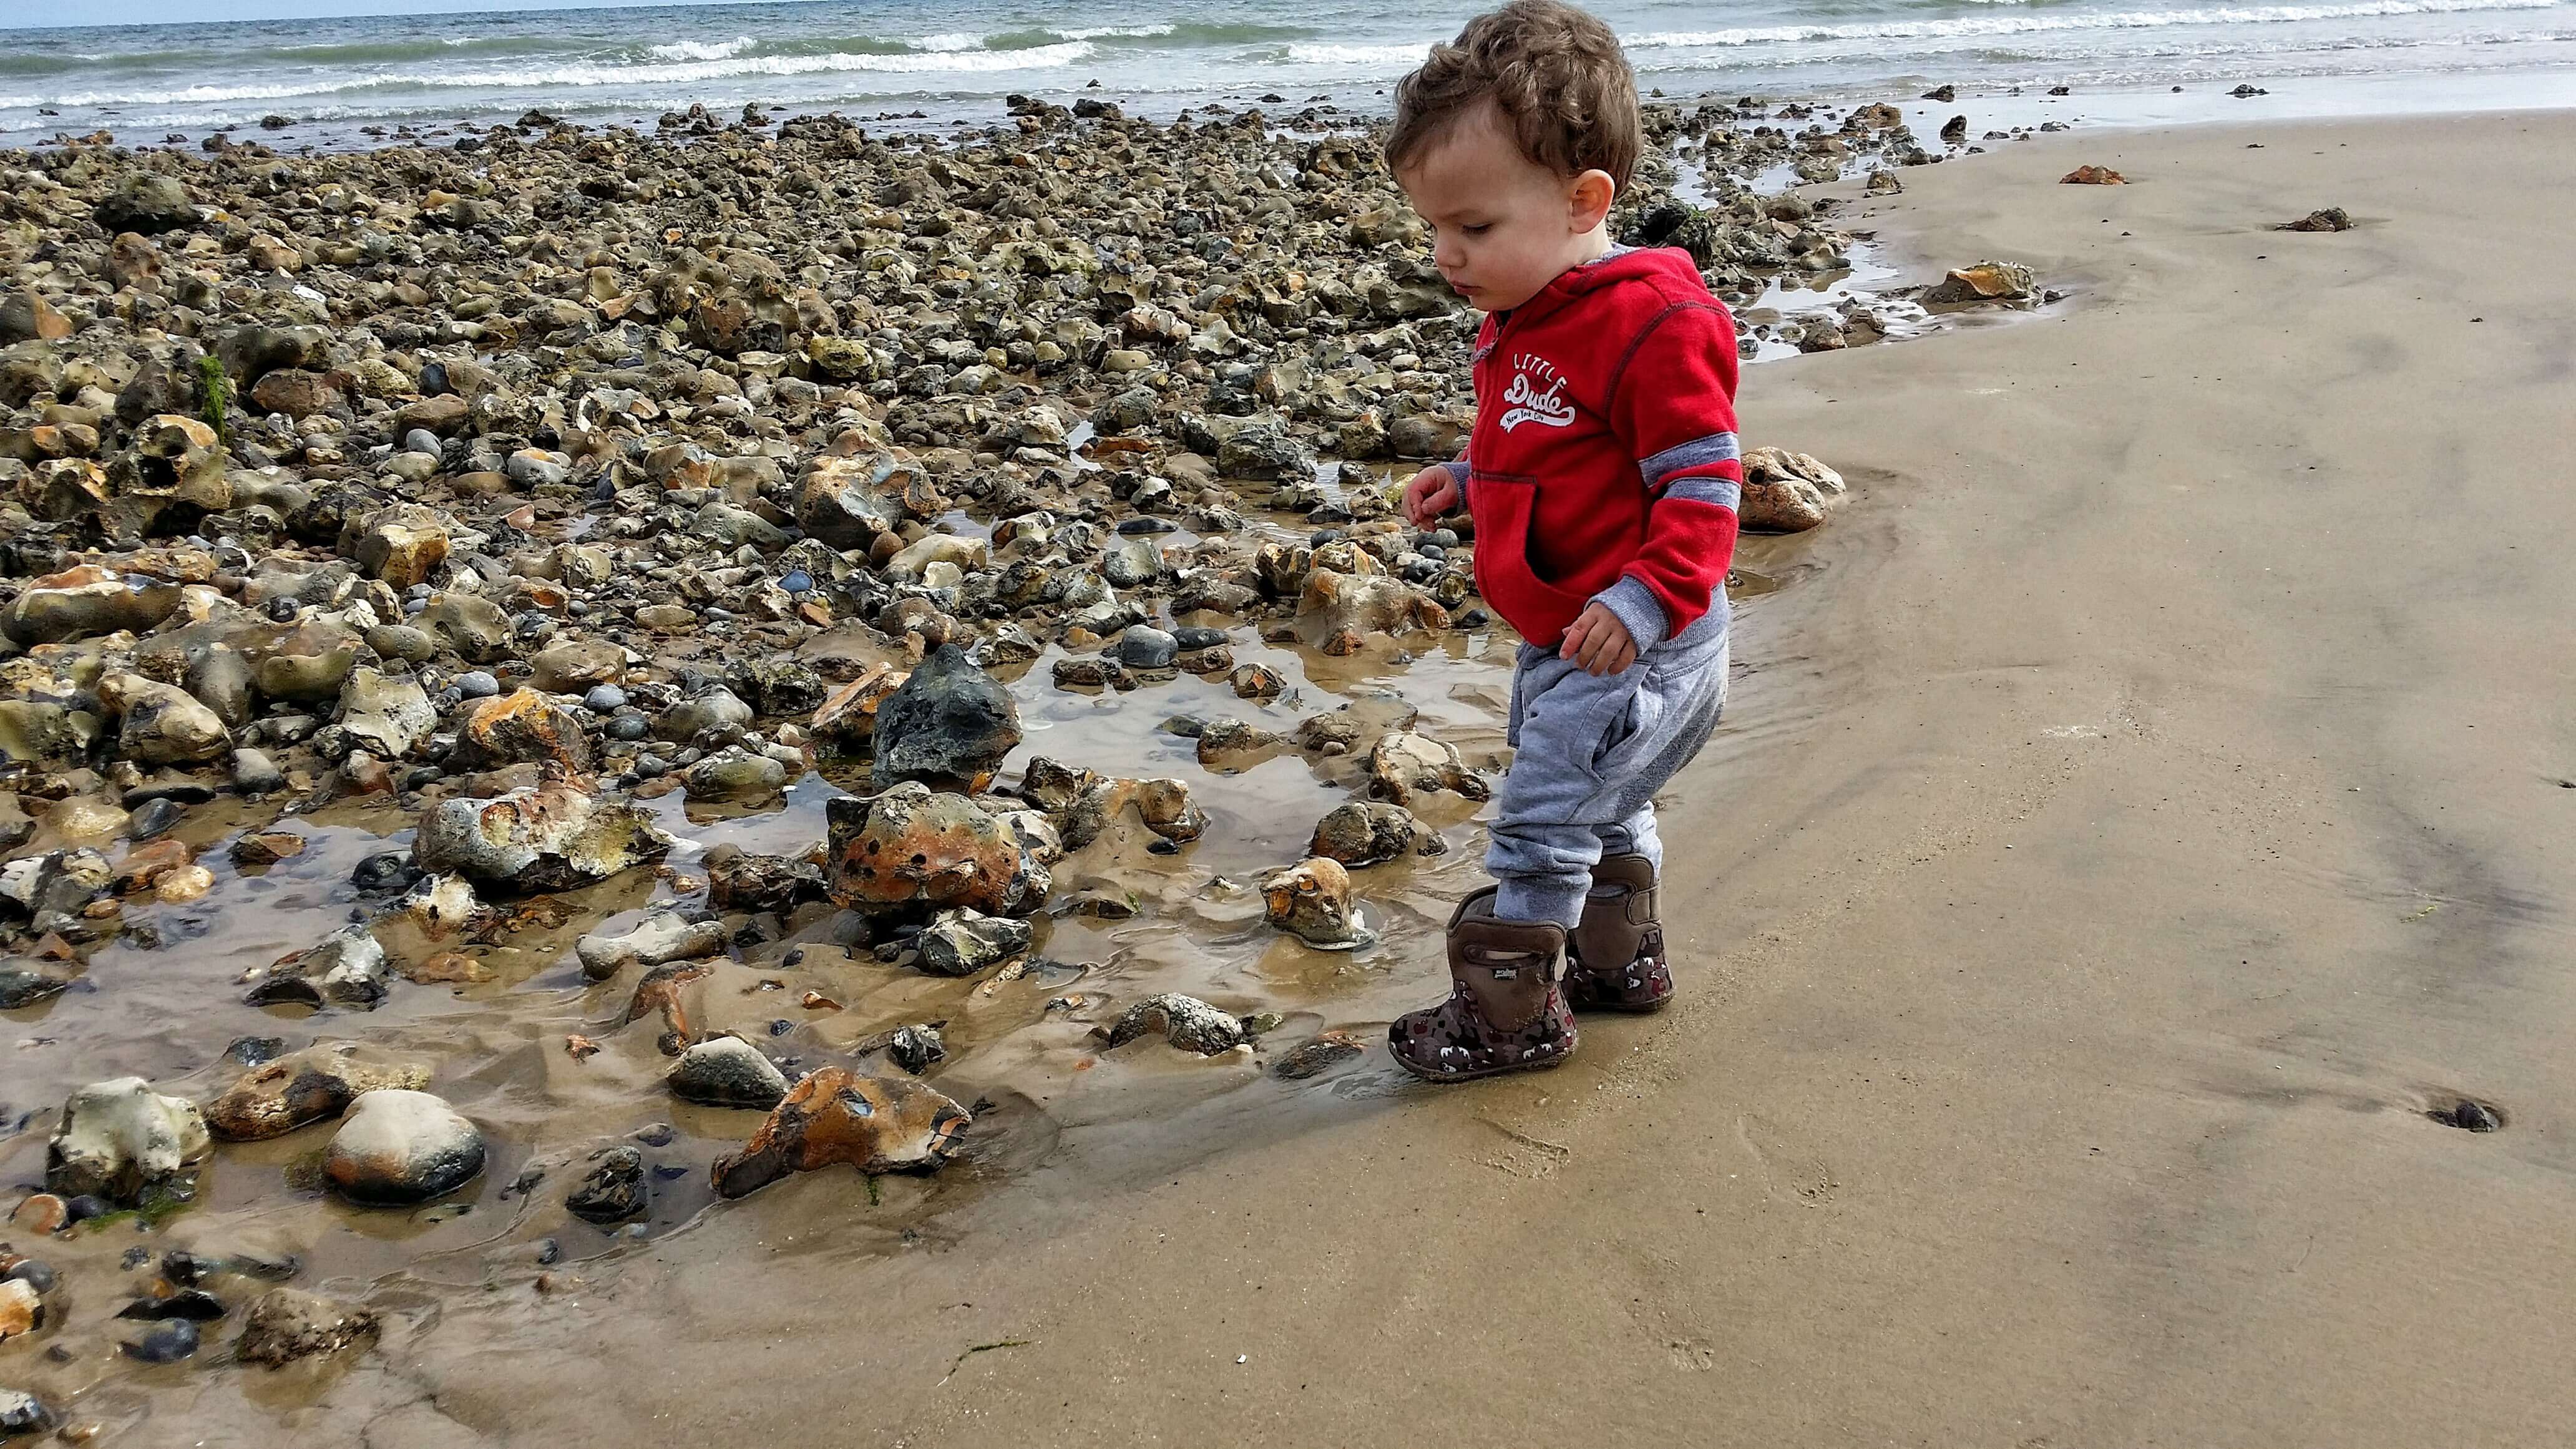 Review: Baby BOGS Waterproof Boots 